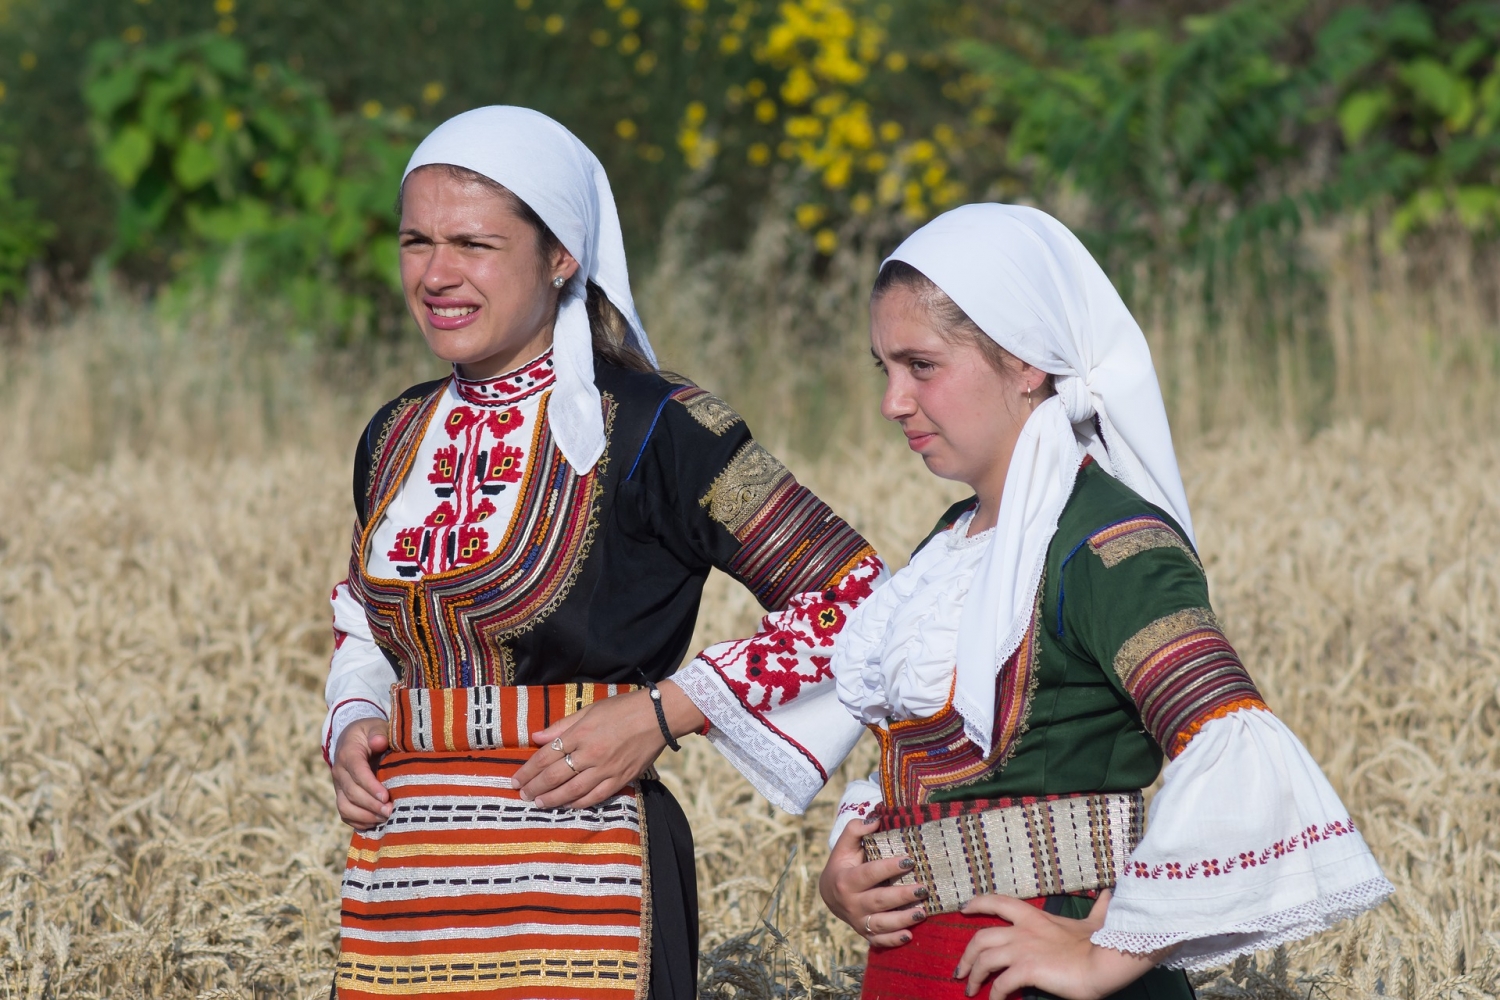 The Woman in the Bulgarian Folklore